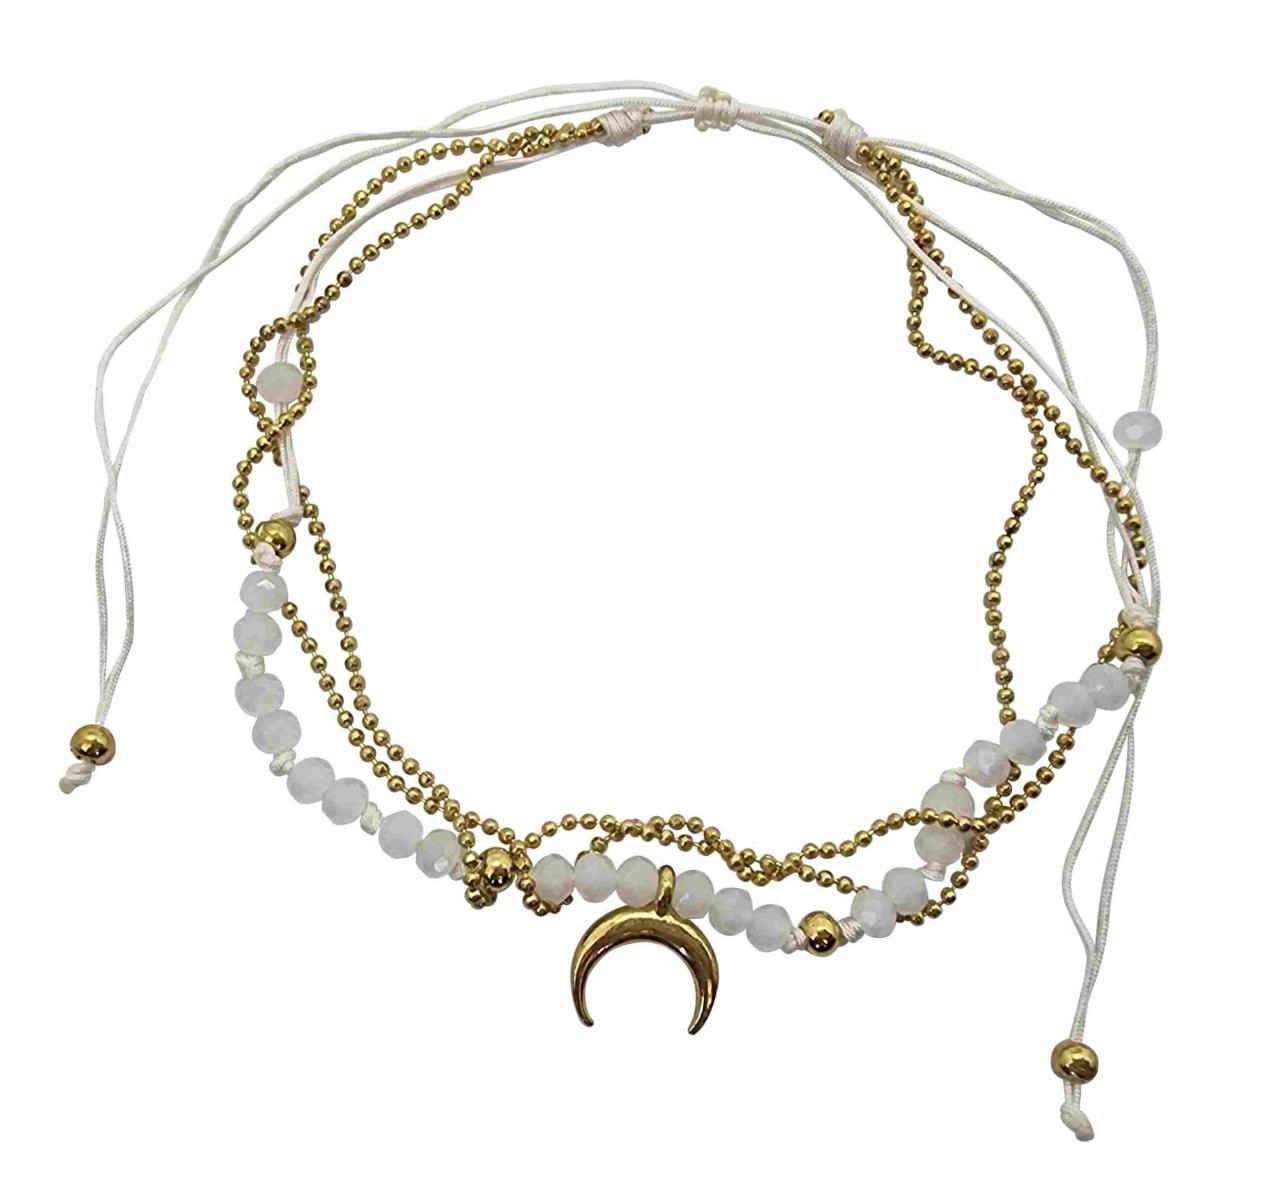 A219 Anklet  double cords,beads  gold colourded metal chain and charms